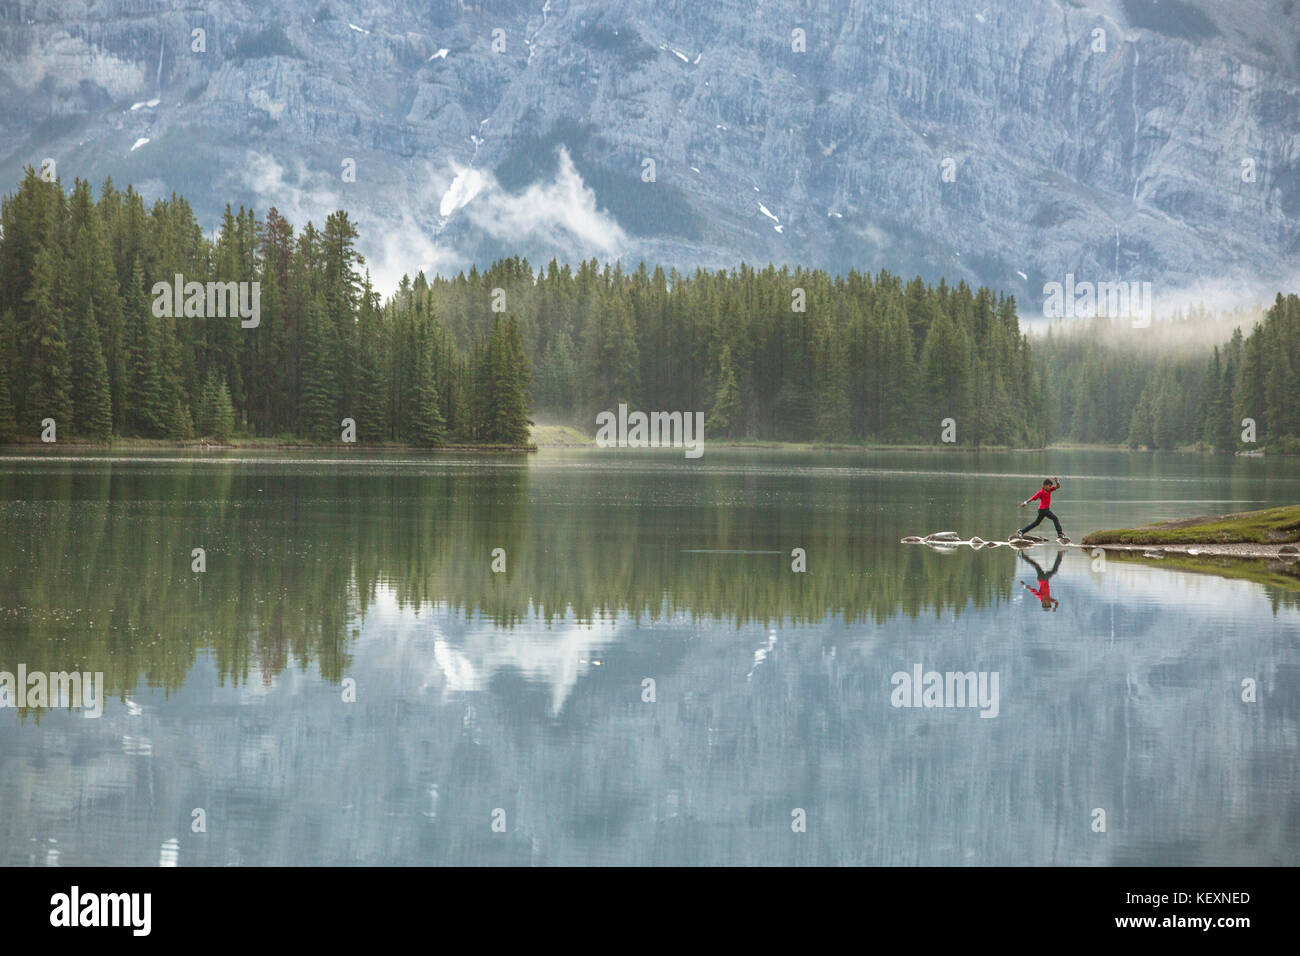 Majestic natural scenery with boy jumping from rock to rock to get to shore of Two Jack Lake, Banff National Park, Alberta, Canada Stock Photo